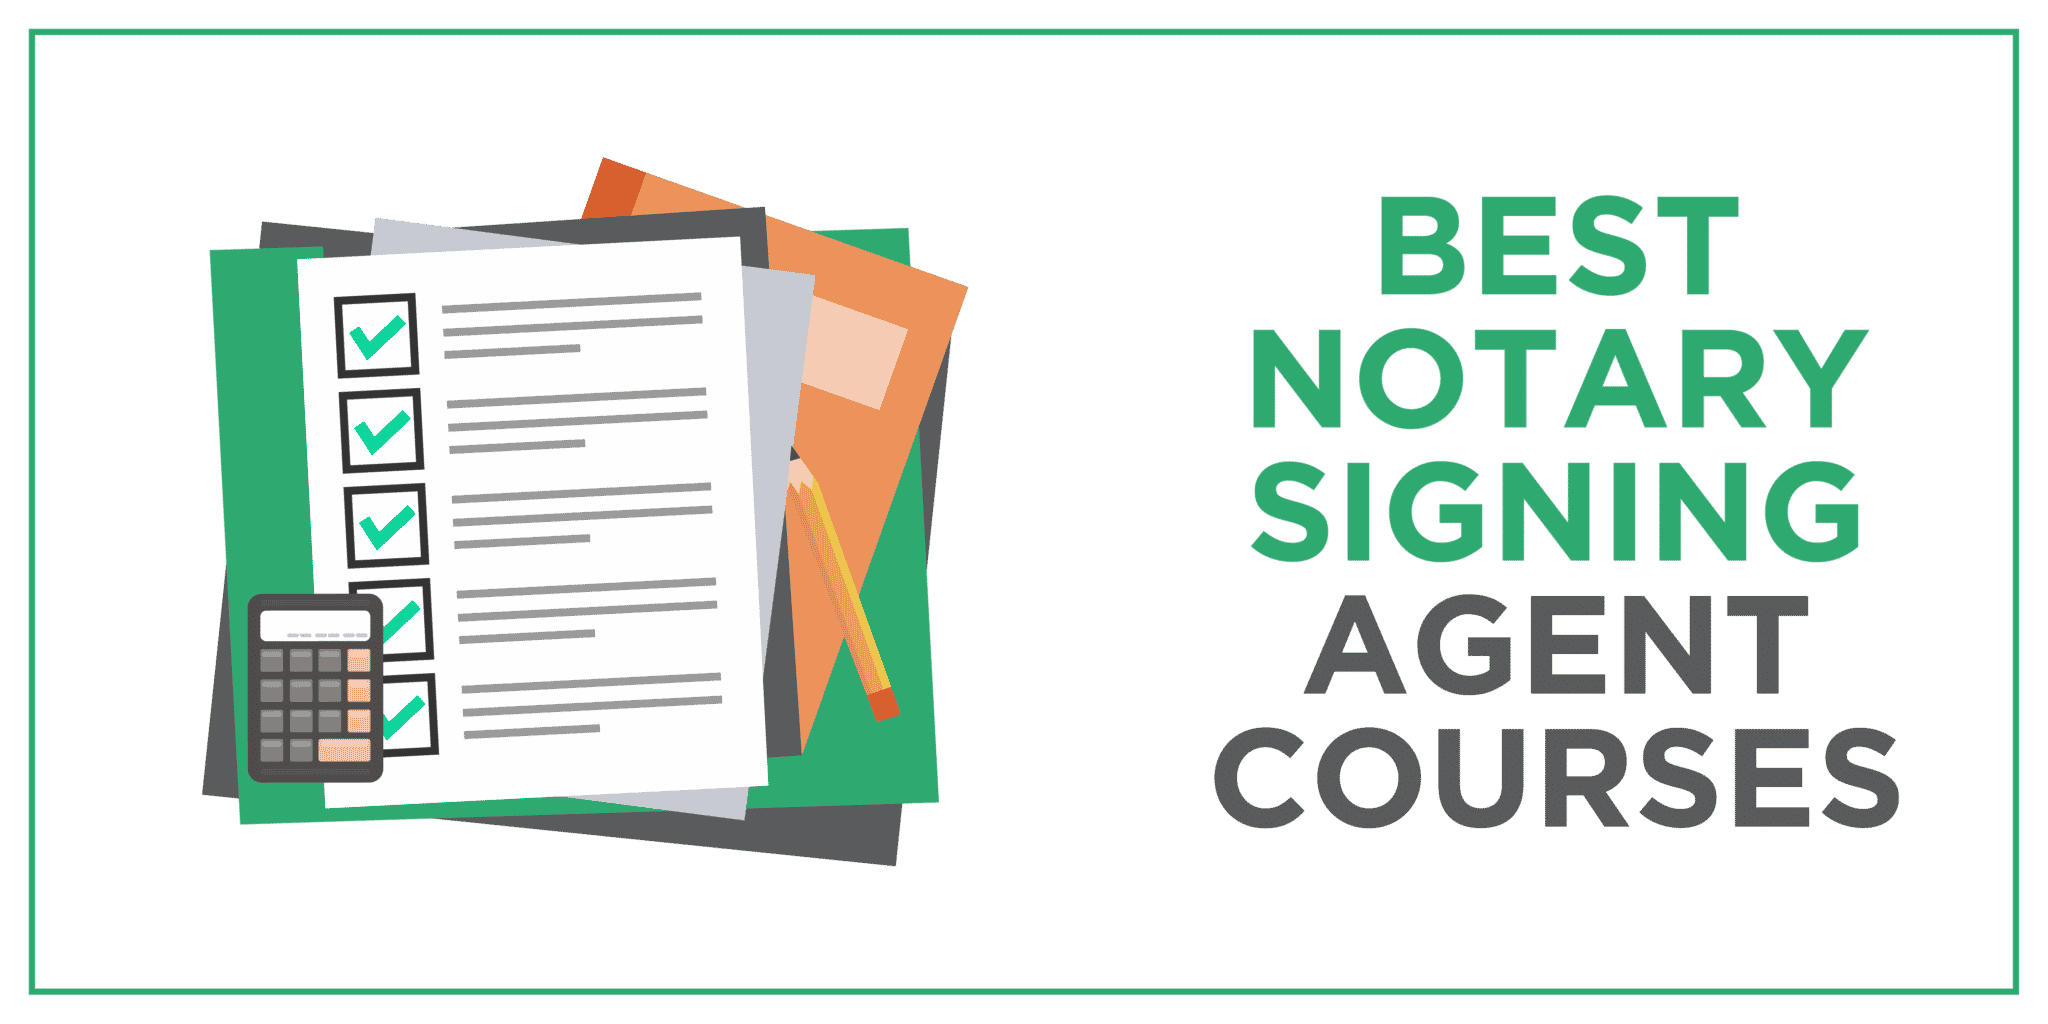 Best Notary Signing Agent Courses